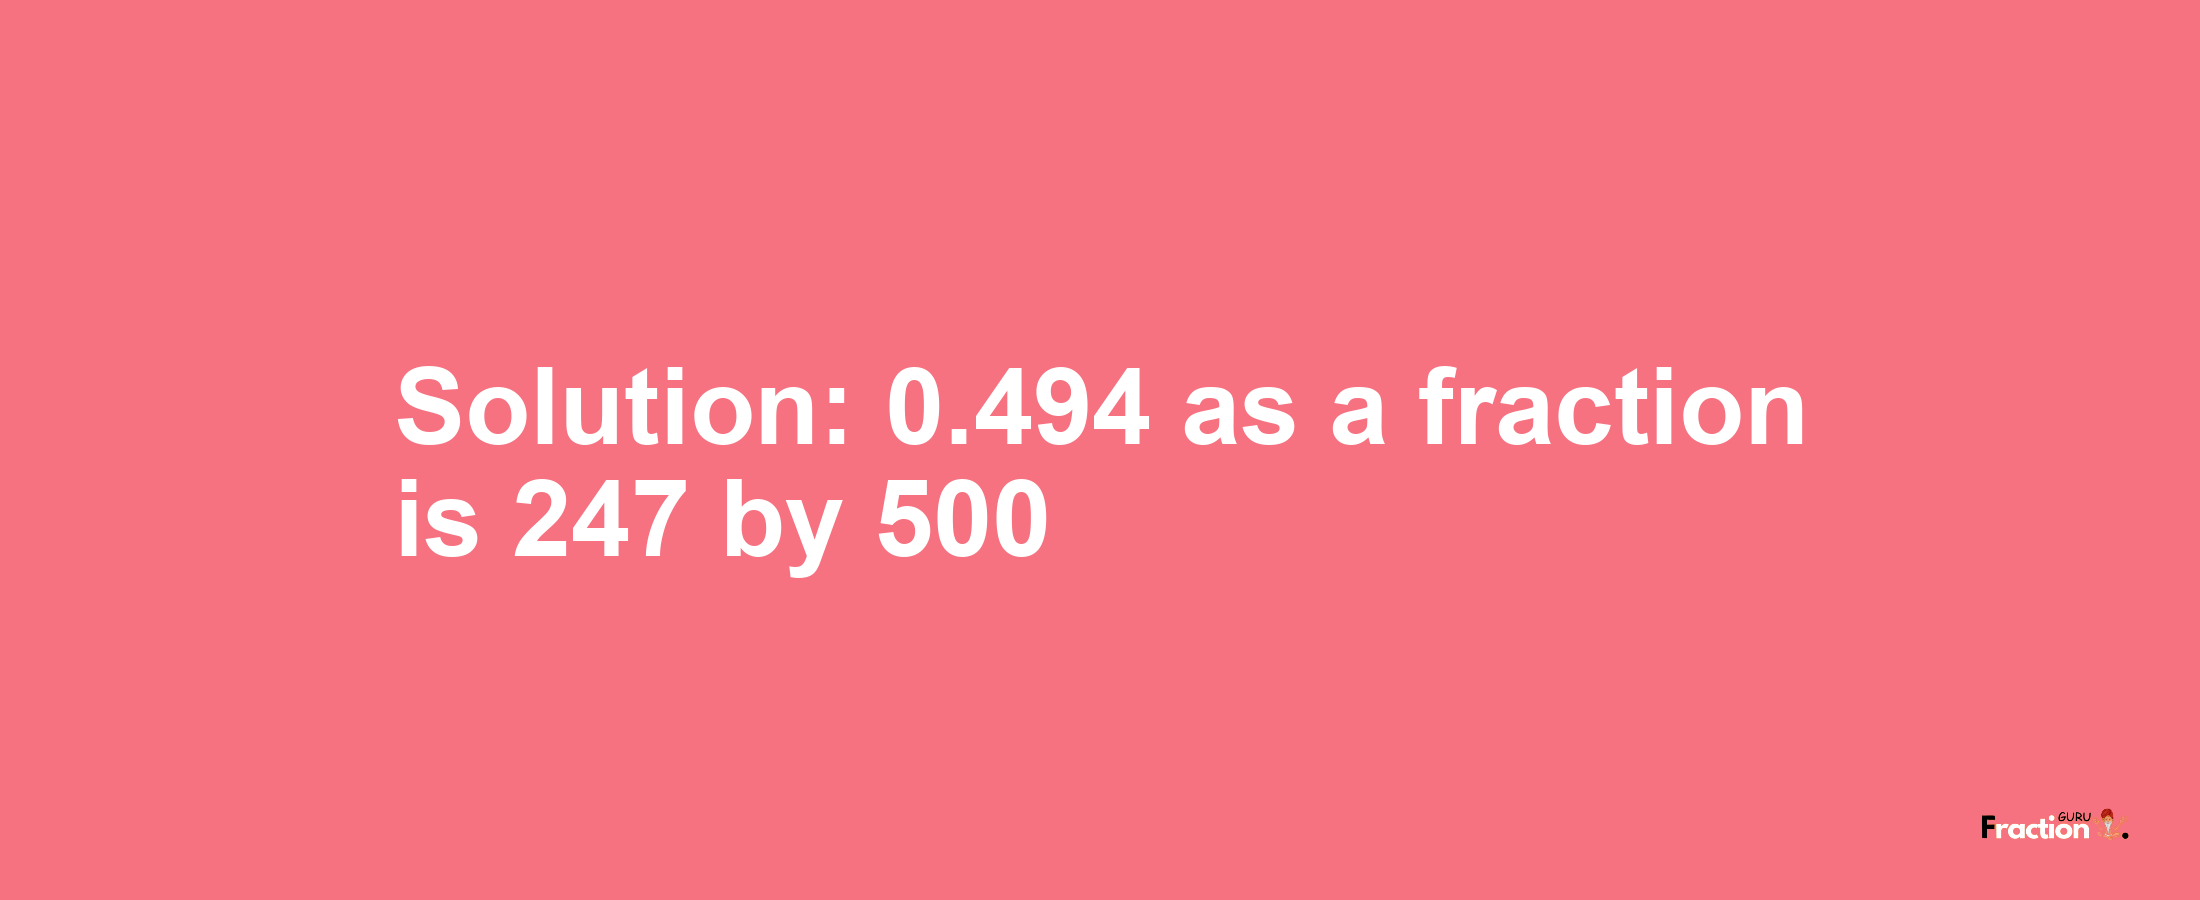 Solution:0.494 as a fraction is 247/500